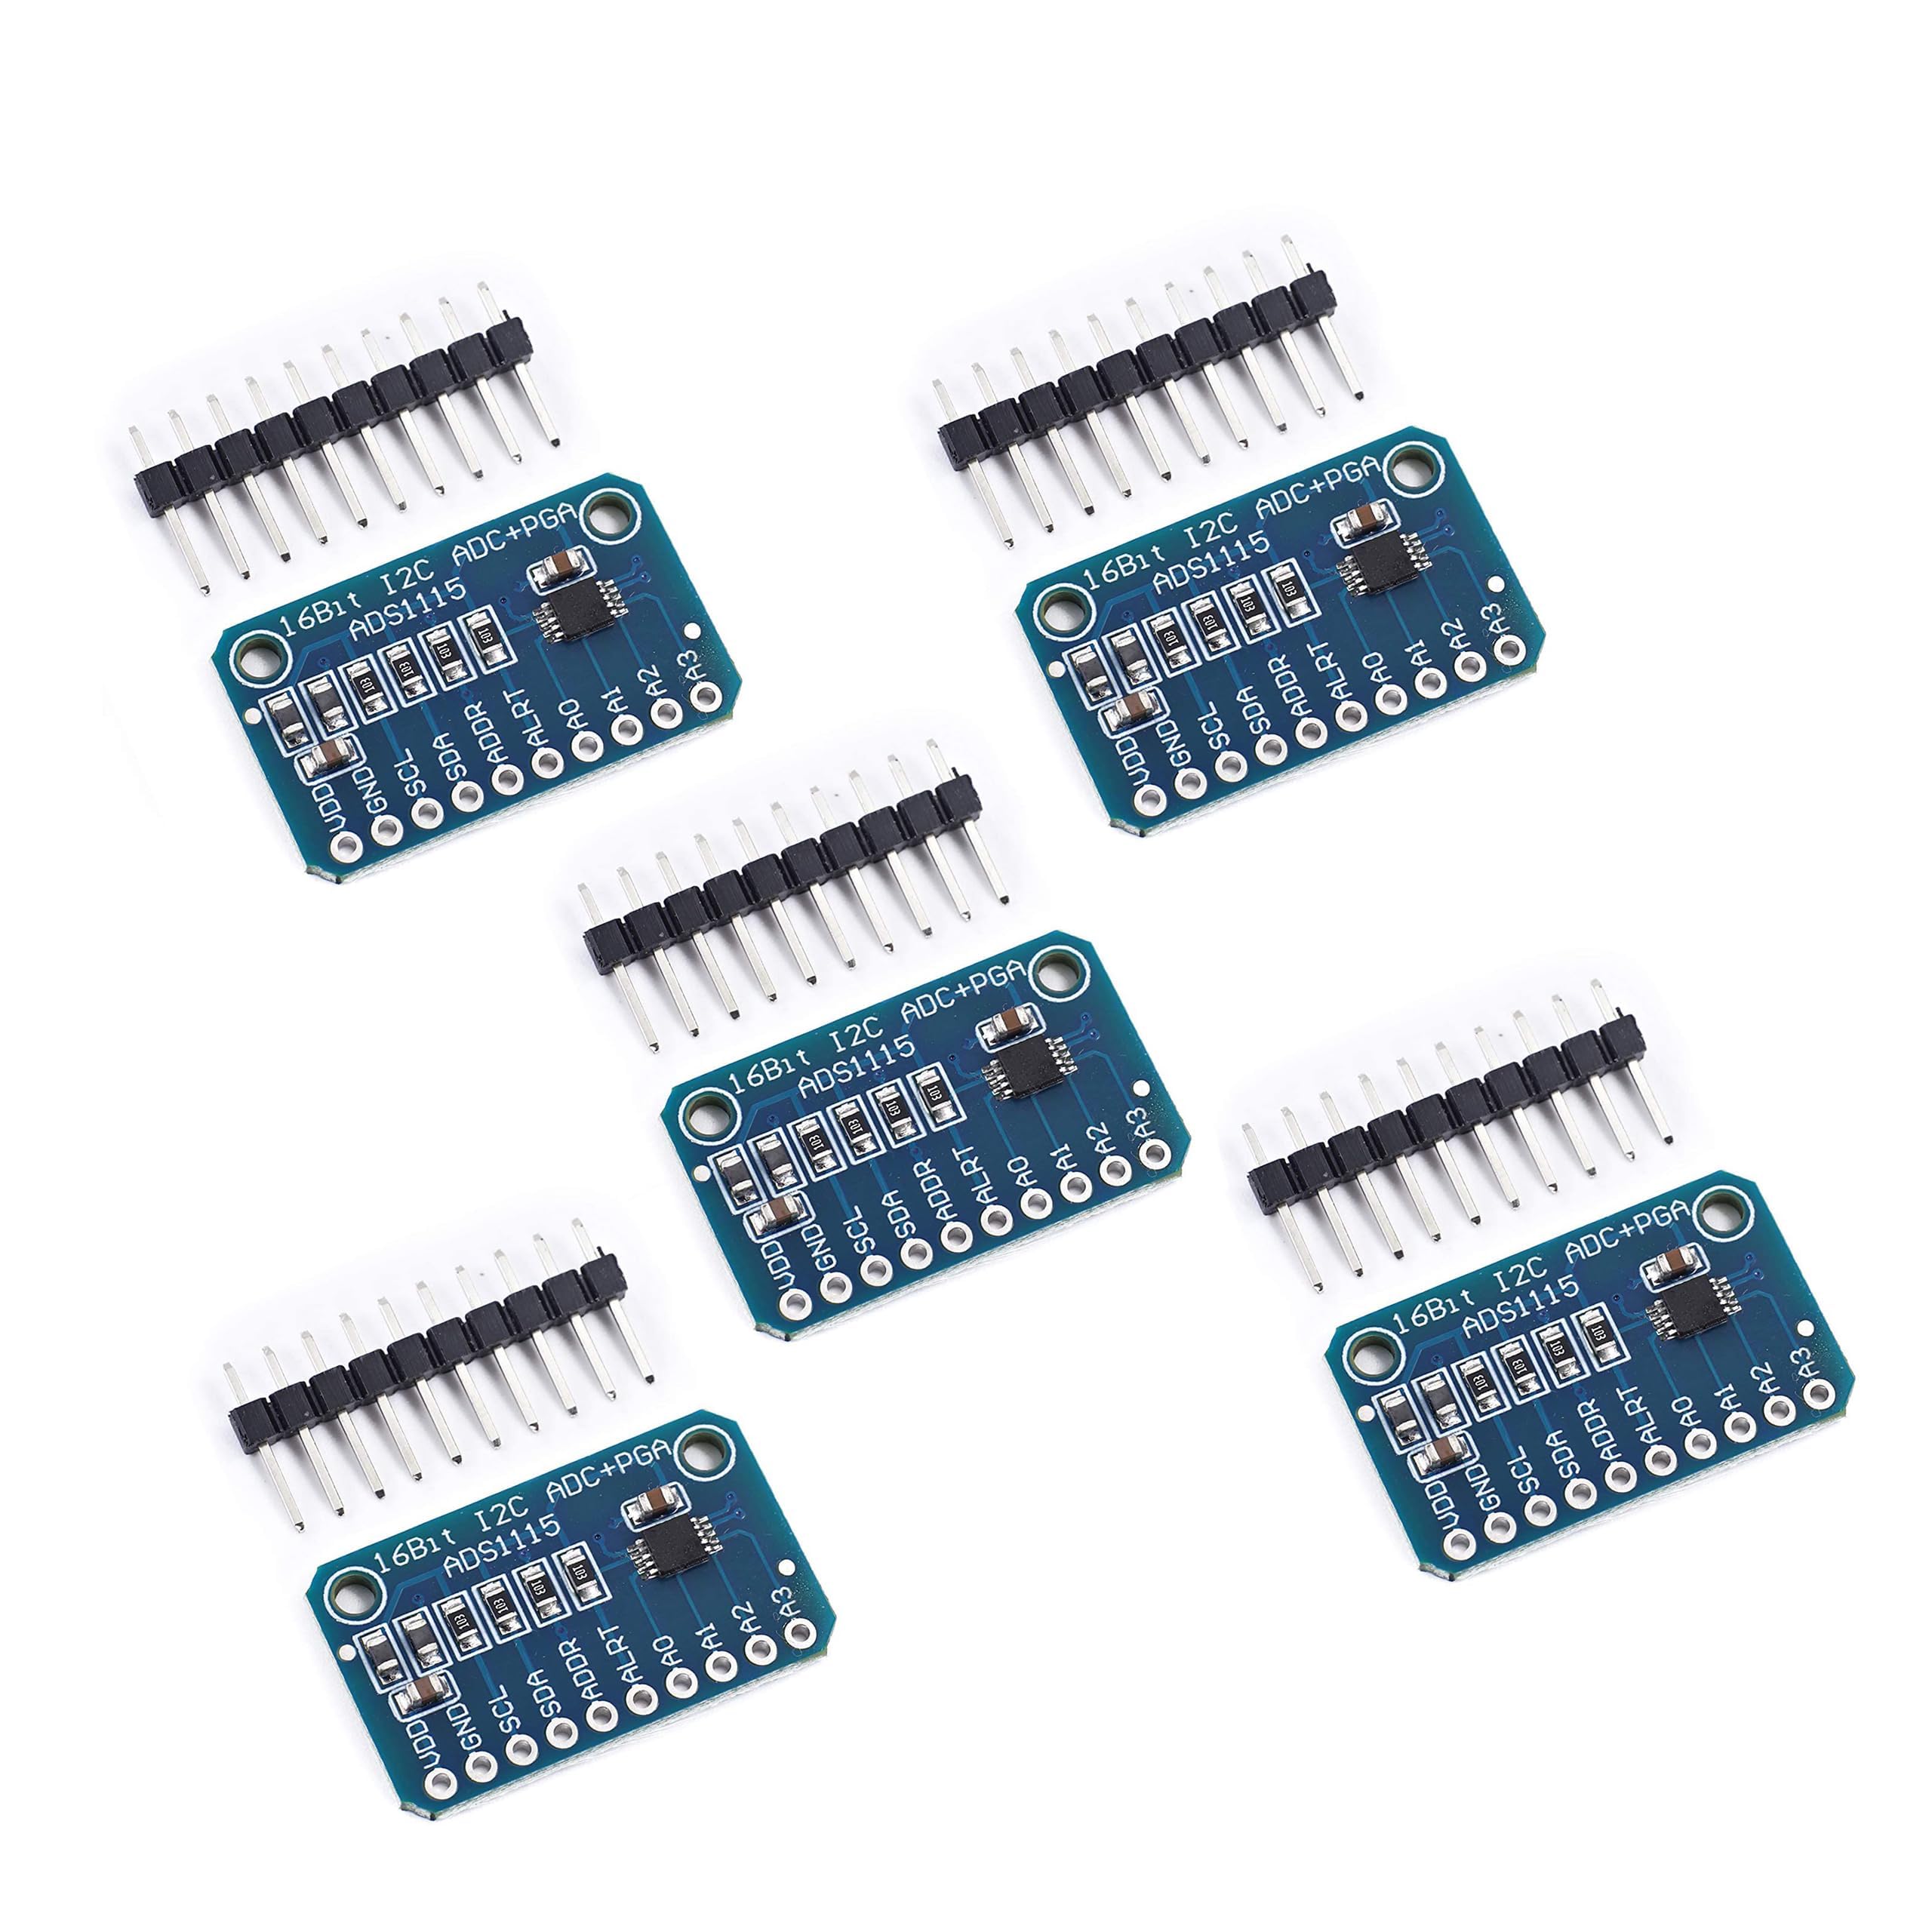 Teyleten Robot ADS1115 16 Bits 4 Channel Analog-to-Digital Converter Precised Develop Board Module Amplifier Board ADC I2C IIC for Arduino Raspberry Pi (Pack of 5pcs)